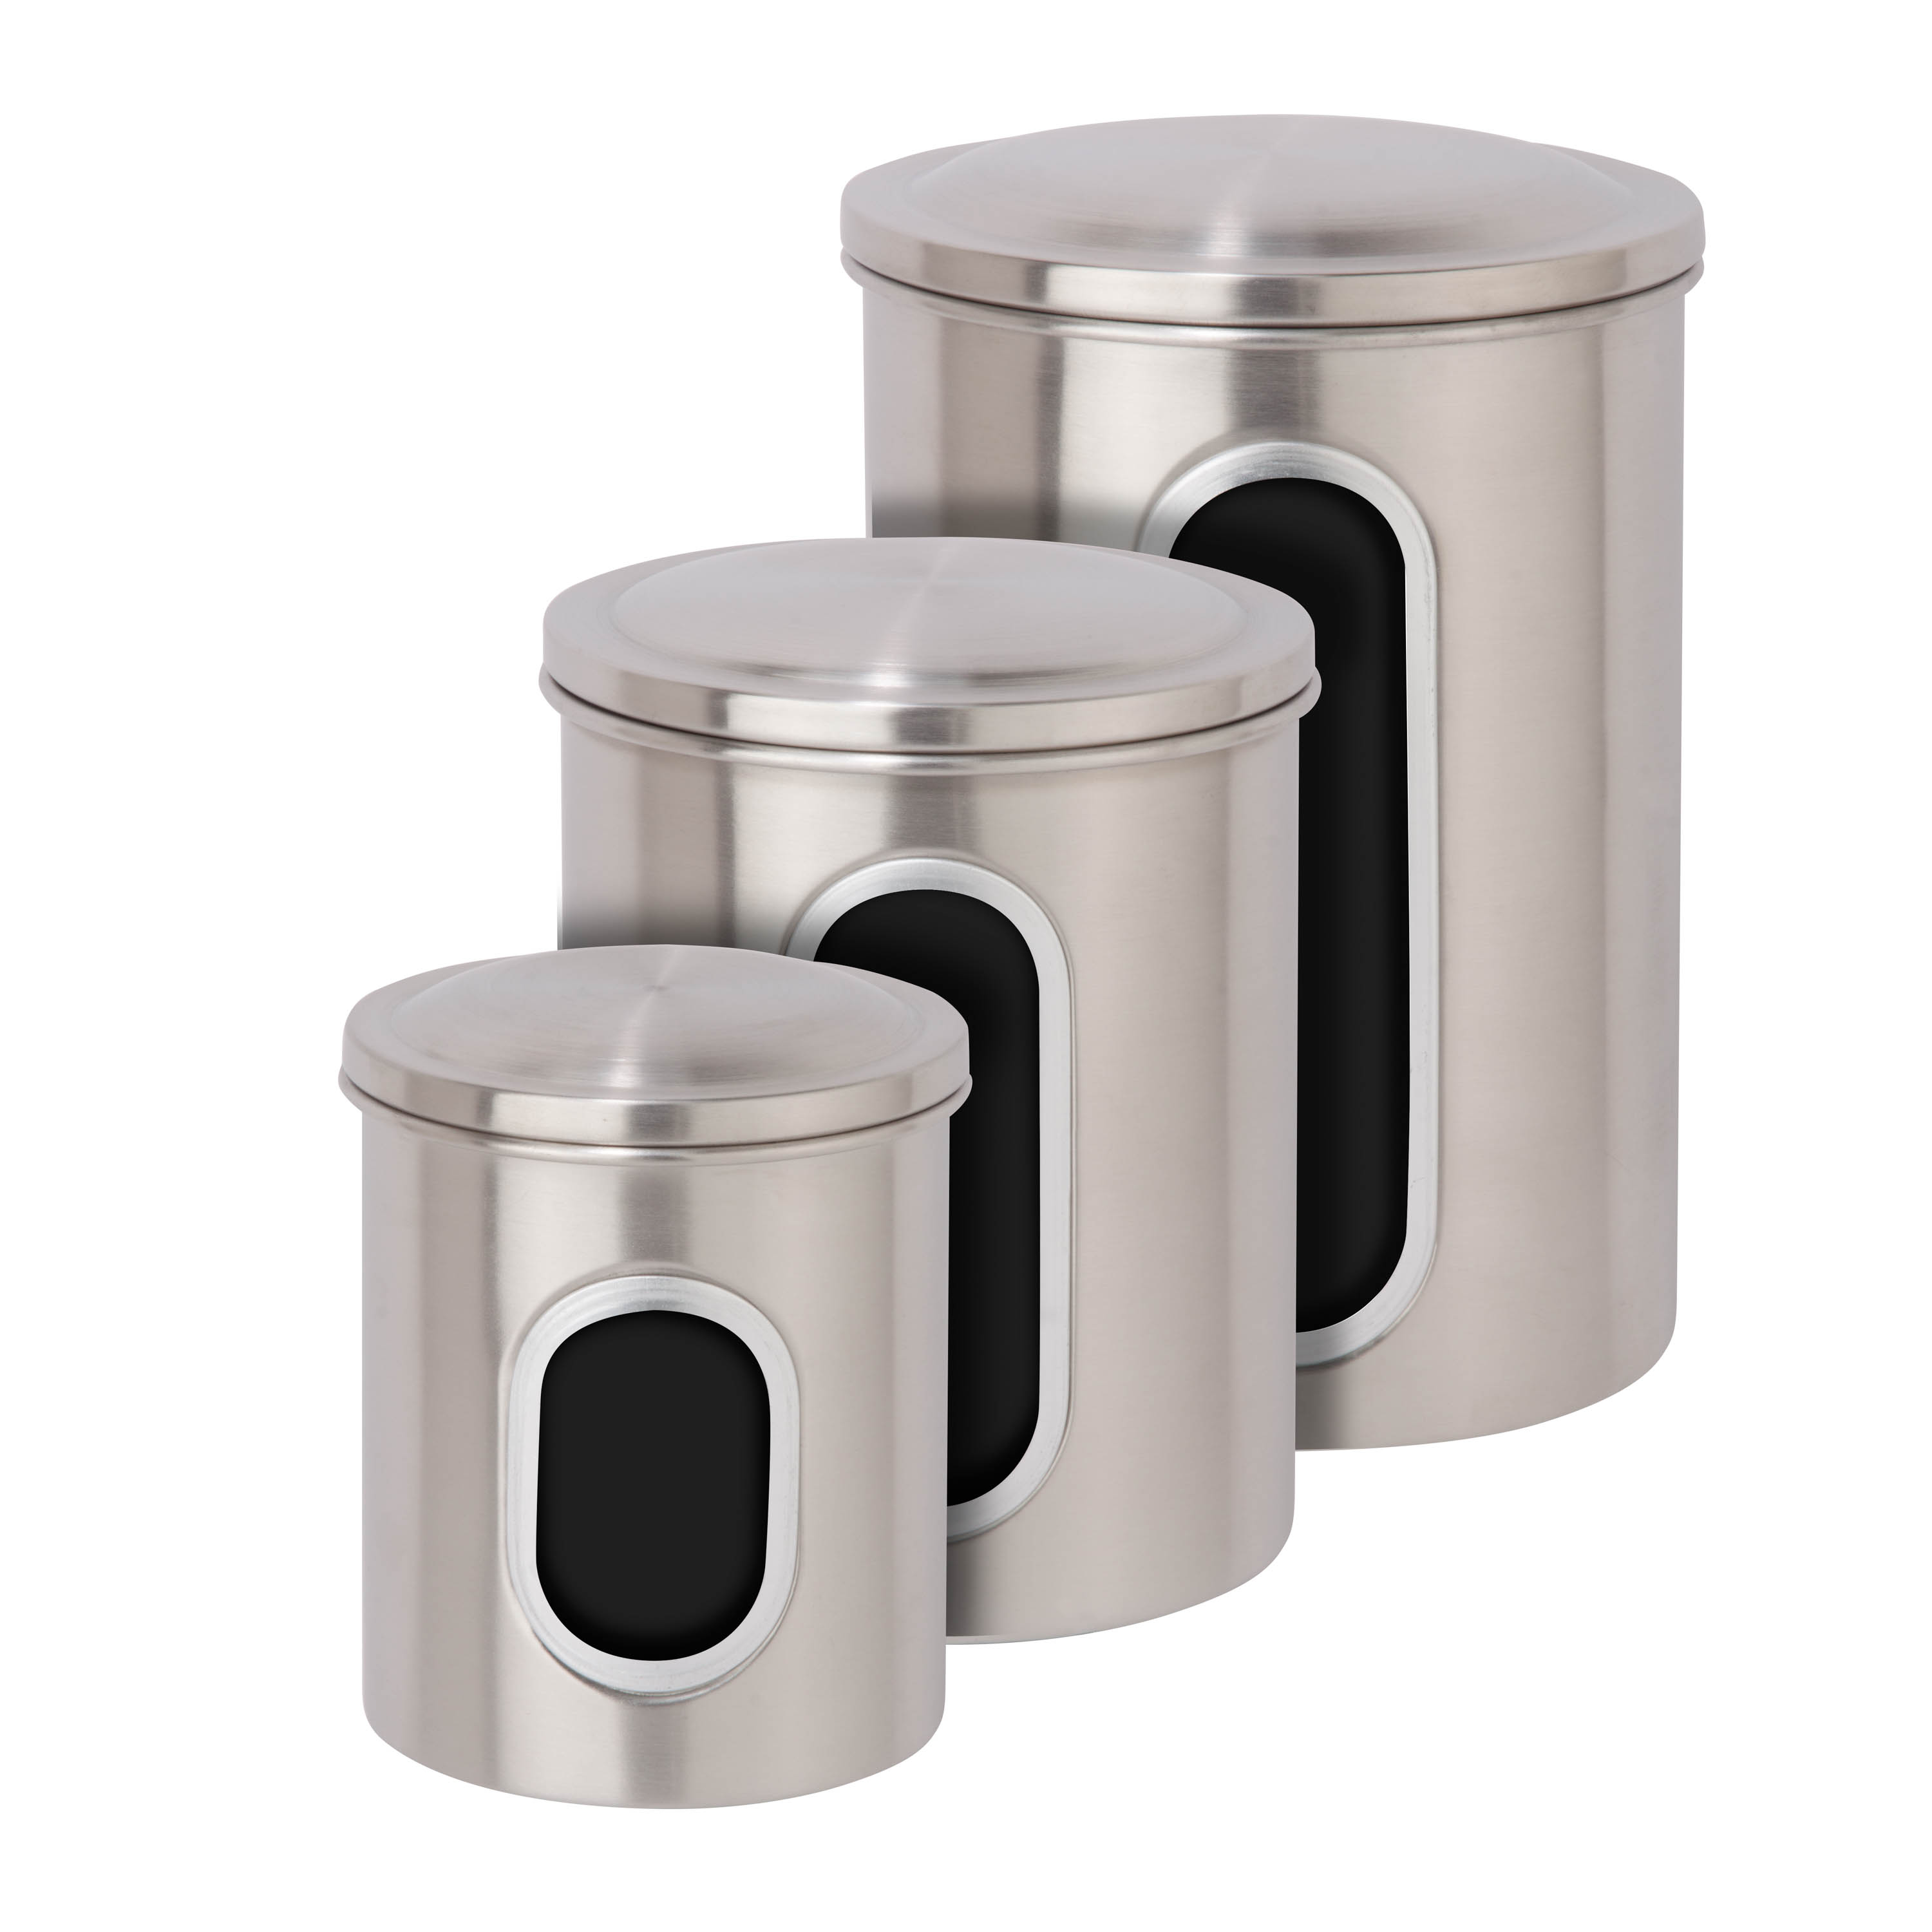 Honey-Can-Do Stainless Steel 3-Piece Nesting Kitchen Canister Set, Silver - image 4 of 5